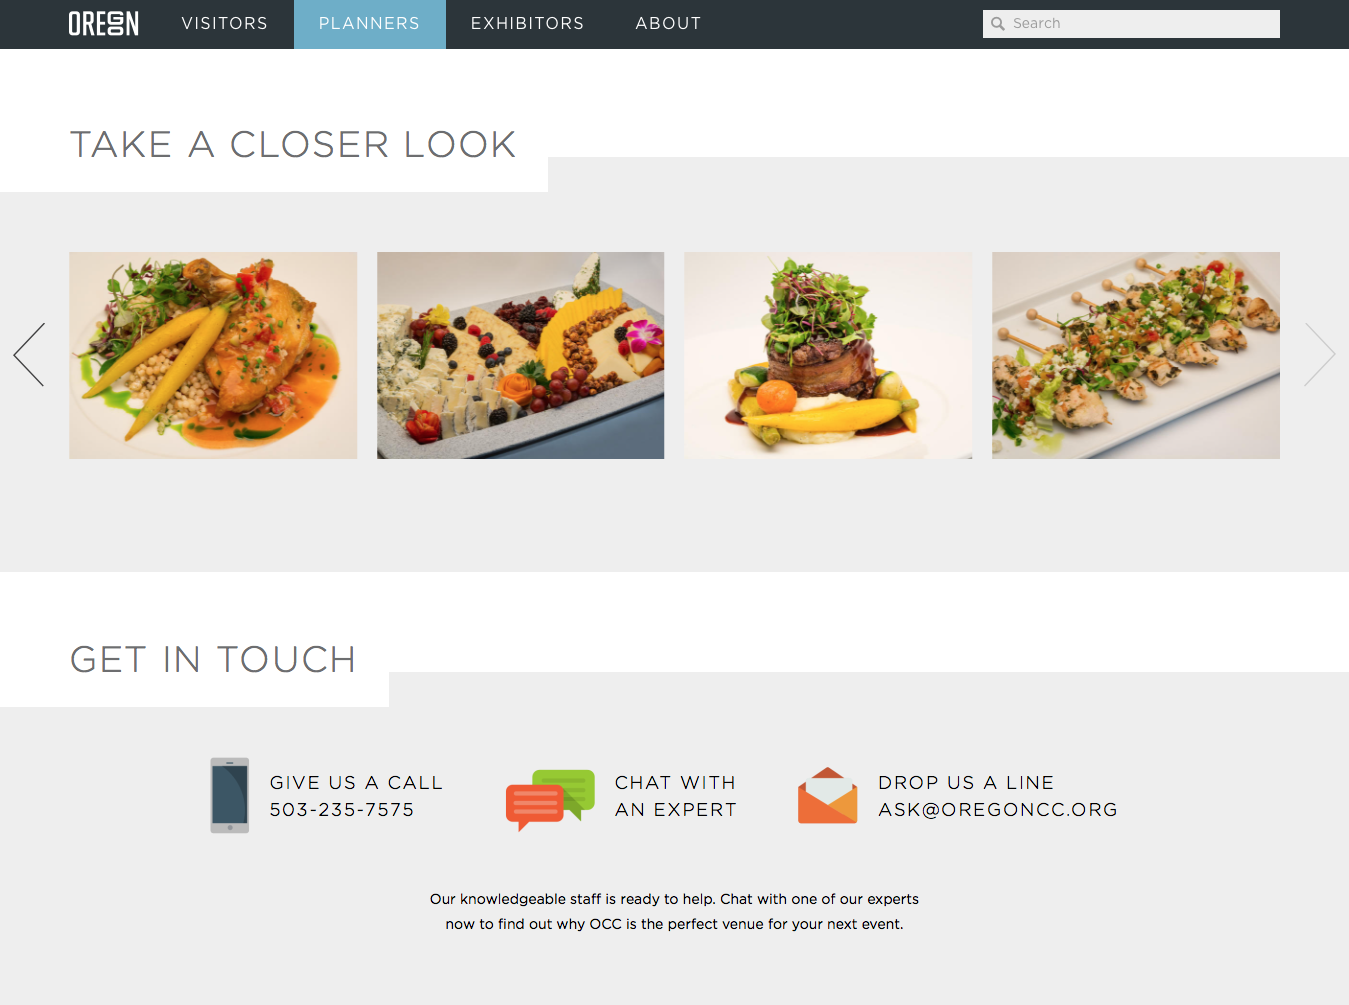 Screenshot: Food images for event planners